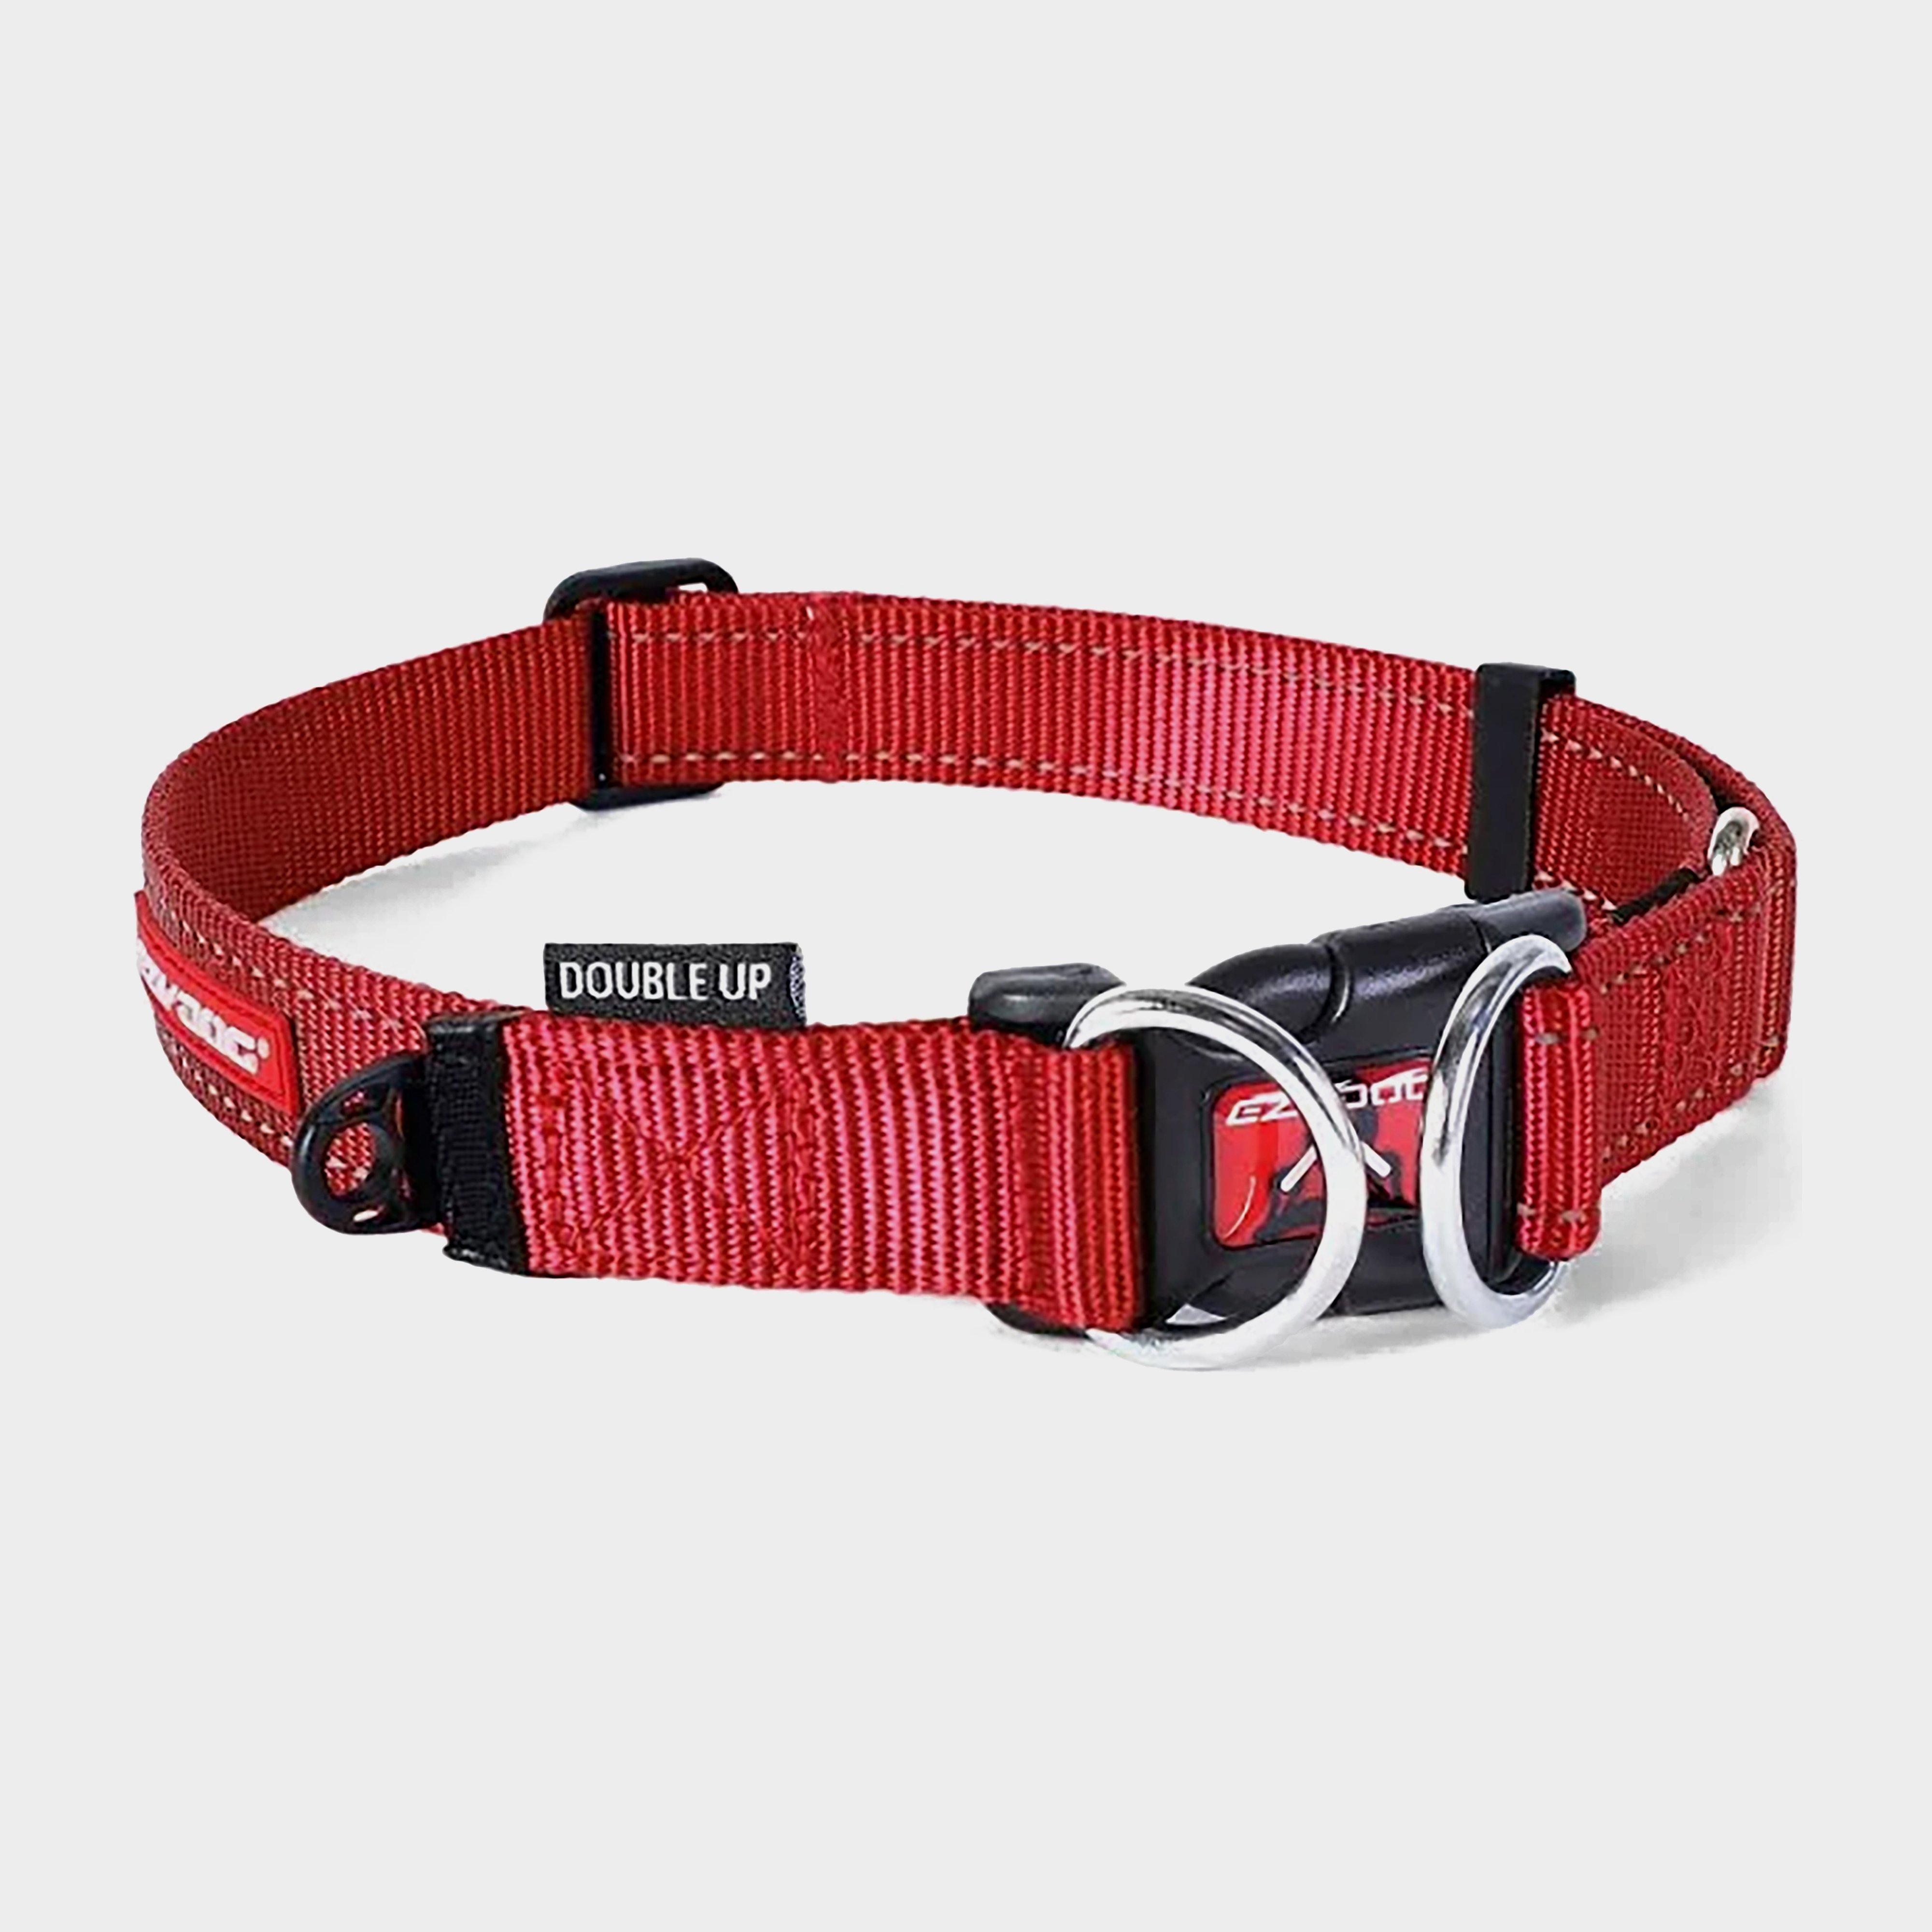 Ezydog Double Up Collar (small) - Red/red  Red/red